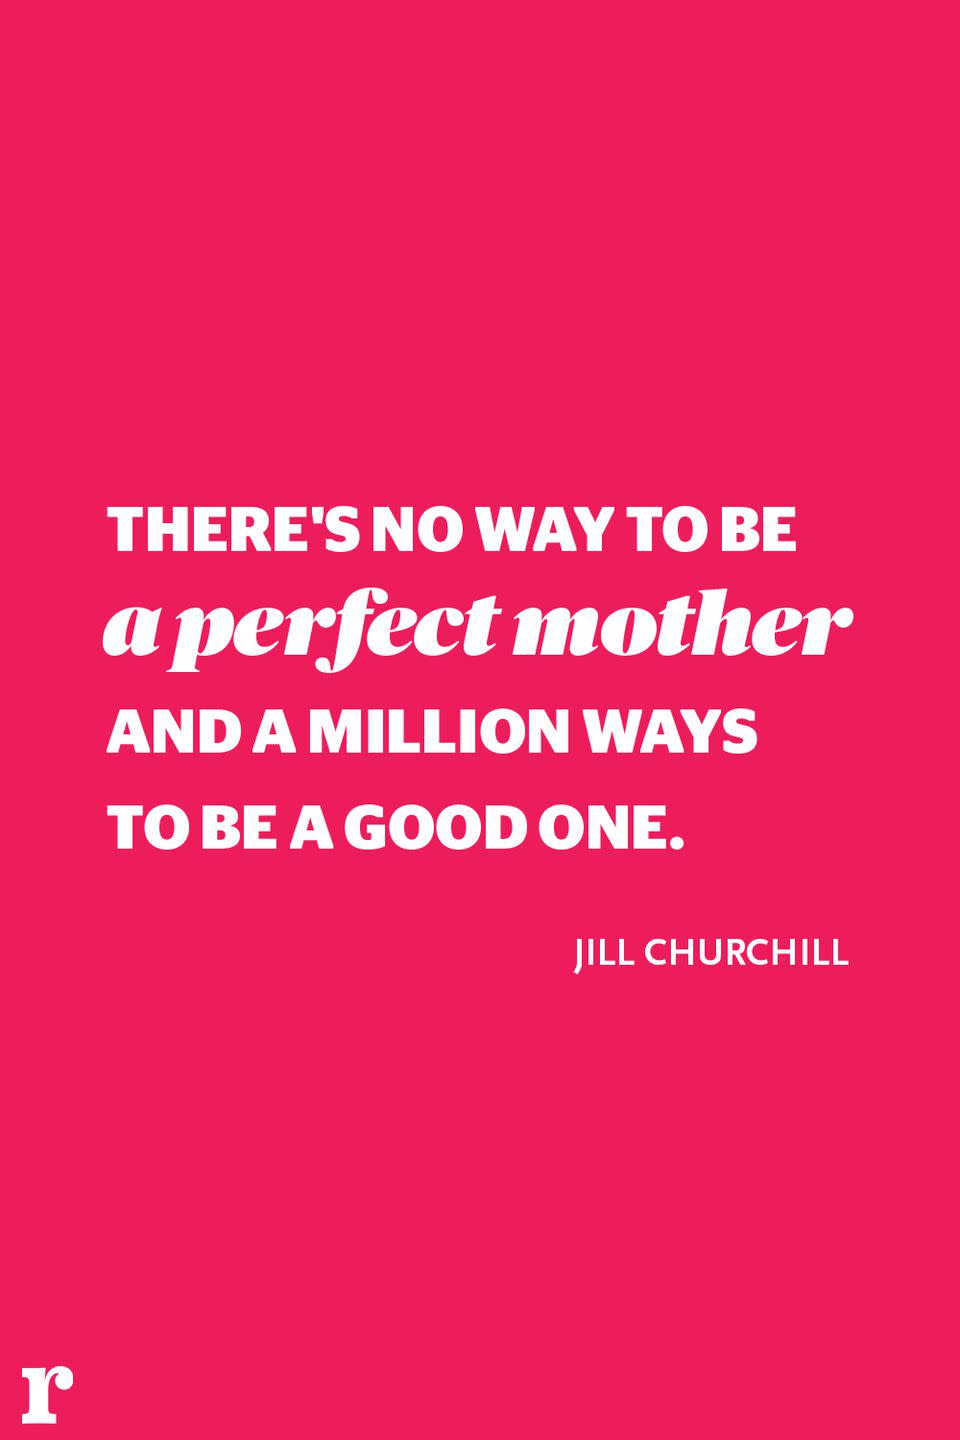 <p>"There's no way to be a perfect mother and a million ways to be a good one." </p><p><em> - Jill Churchill</em></p>